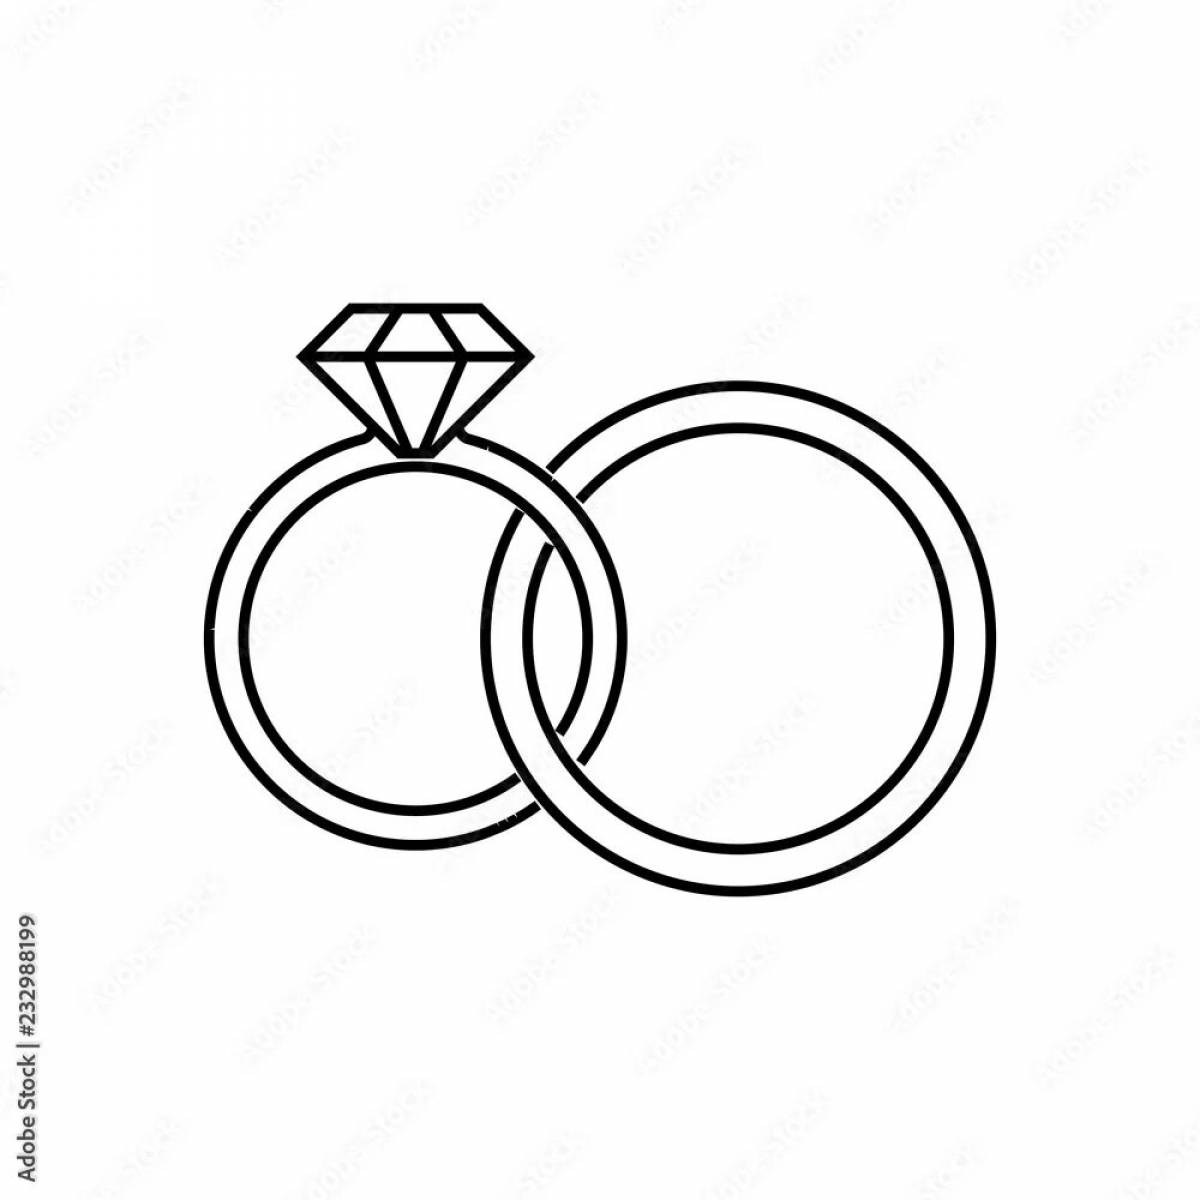 Blissful coloring wedding rings